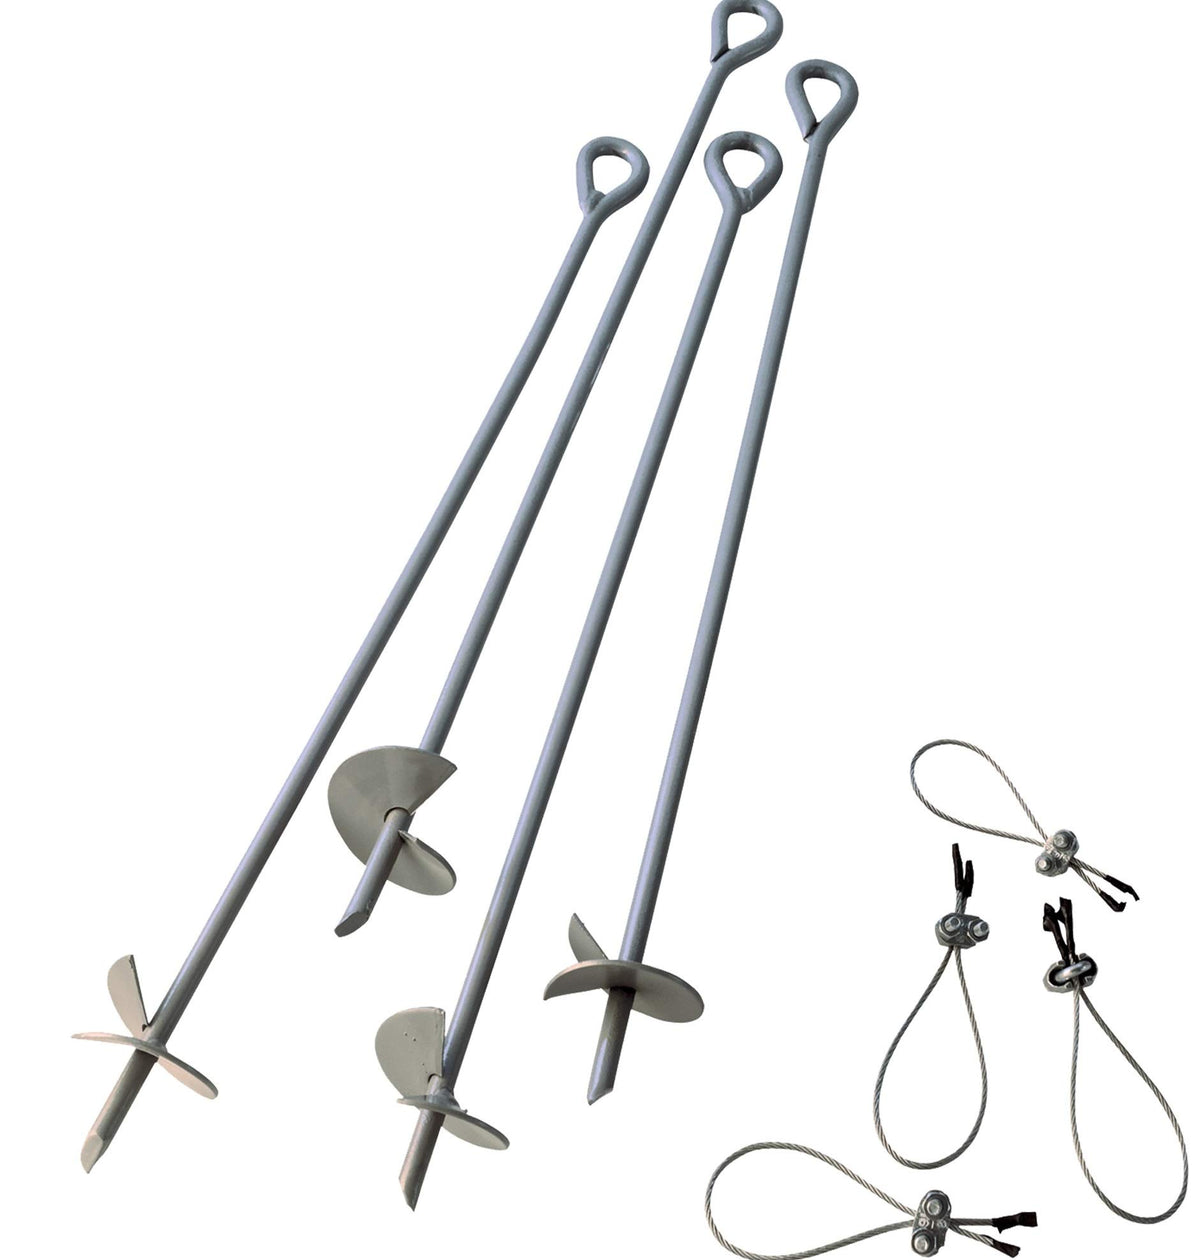 4pc 30" Earth Auger Anchor Kit w/ 4 Clamp-on all steel